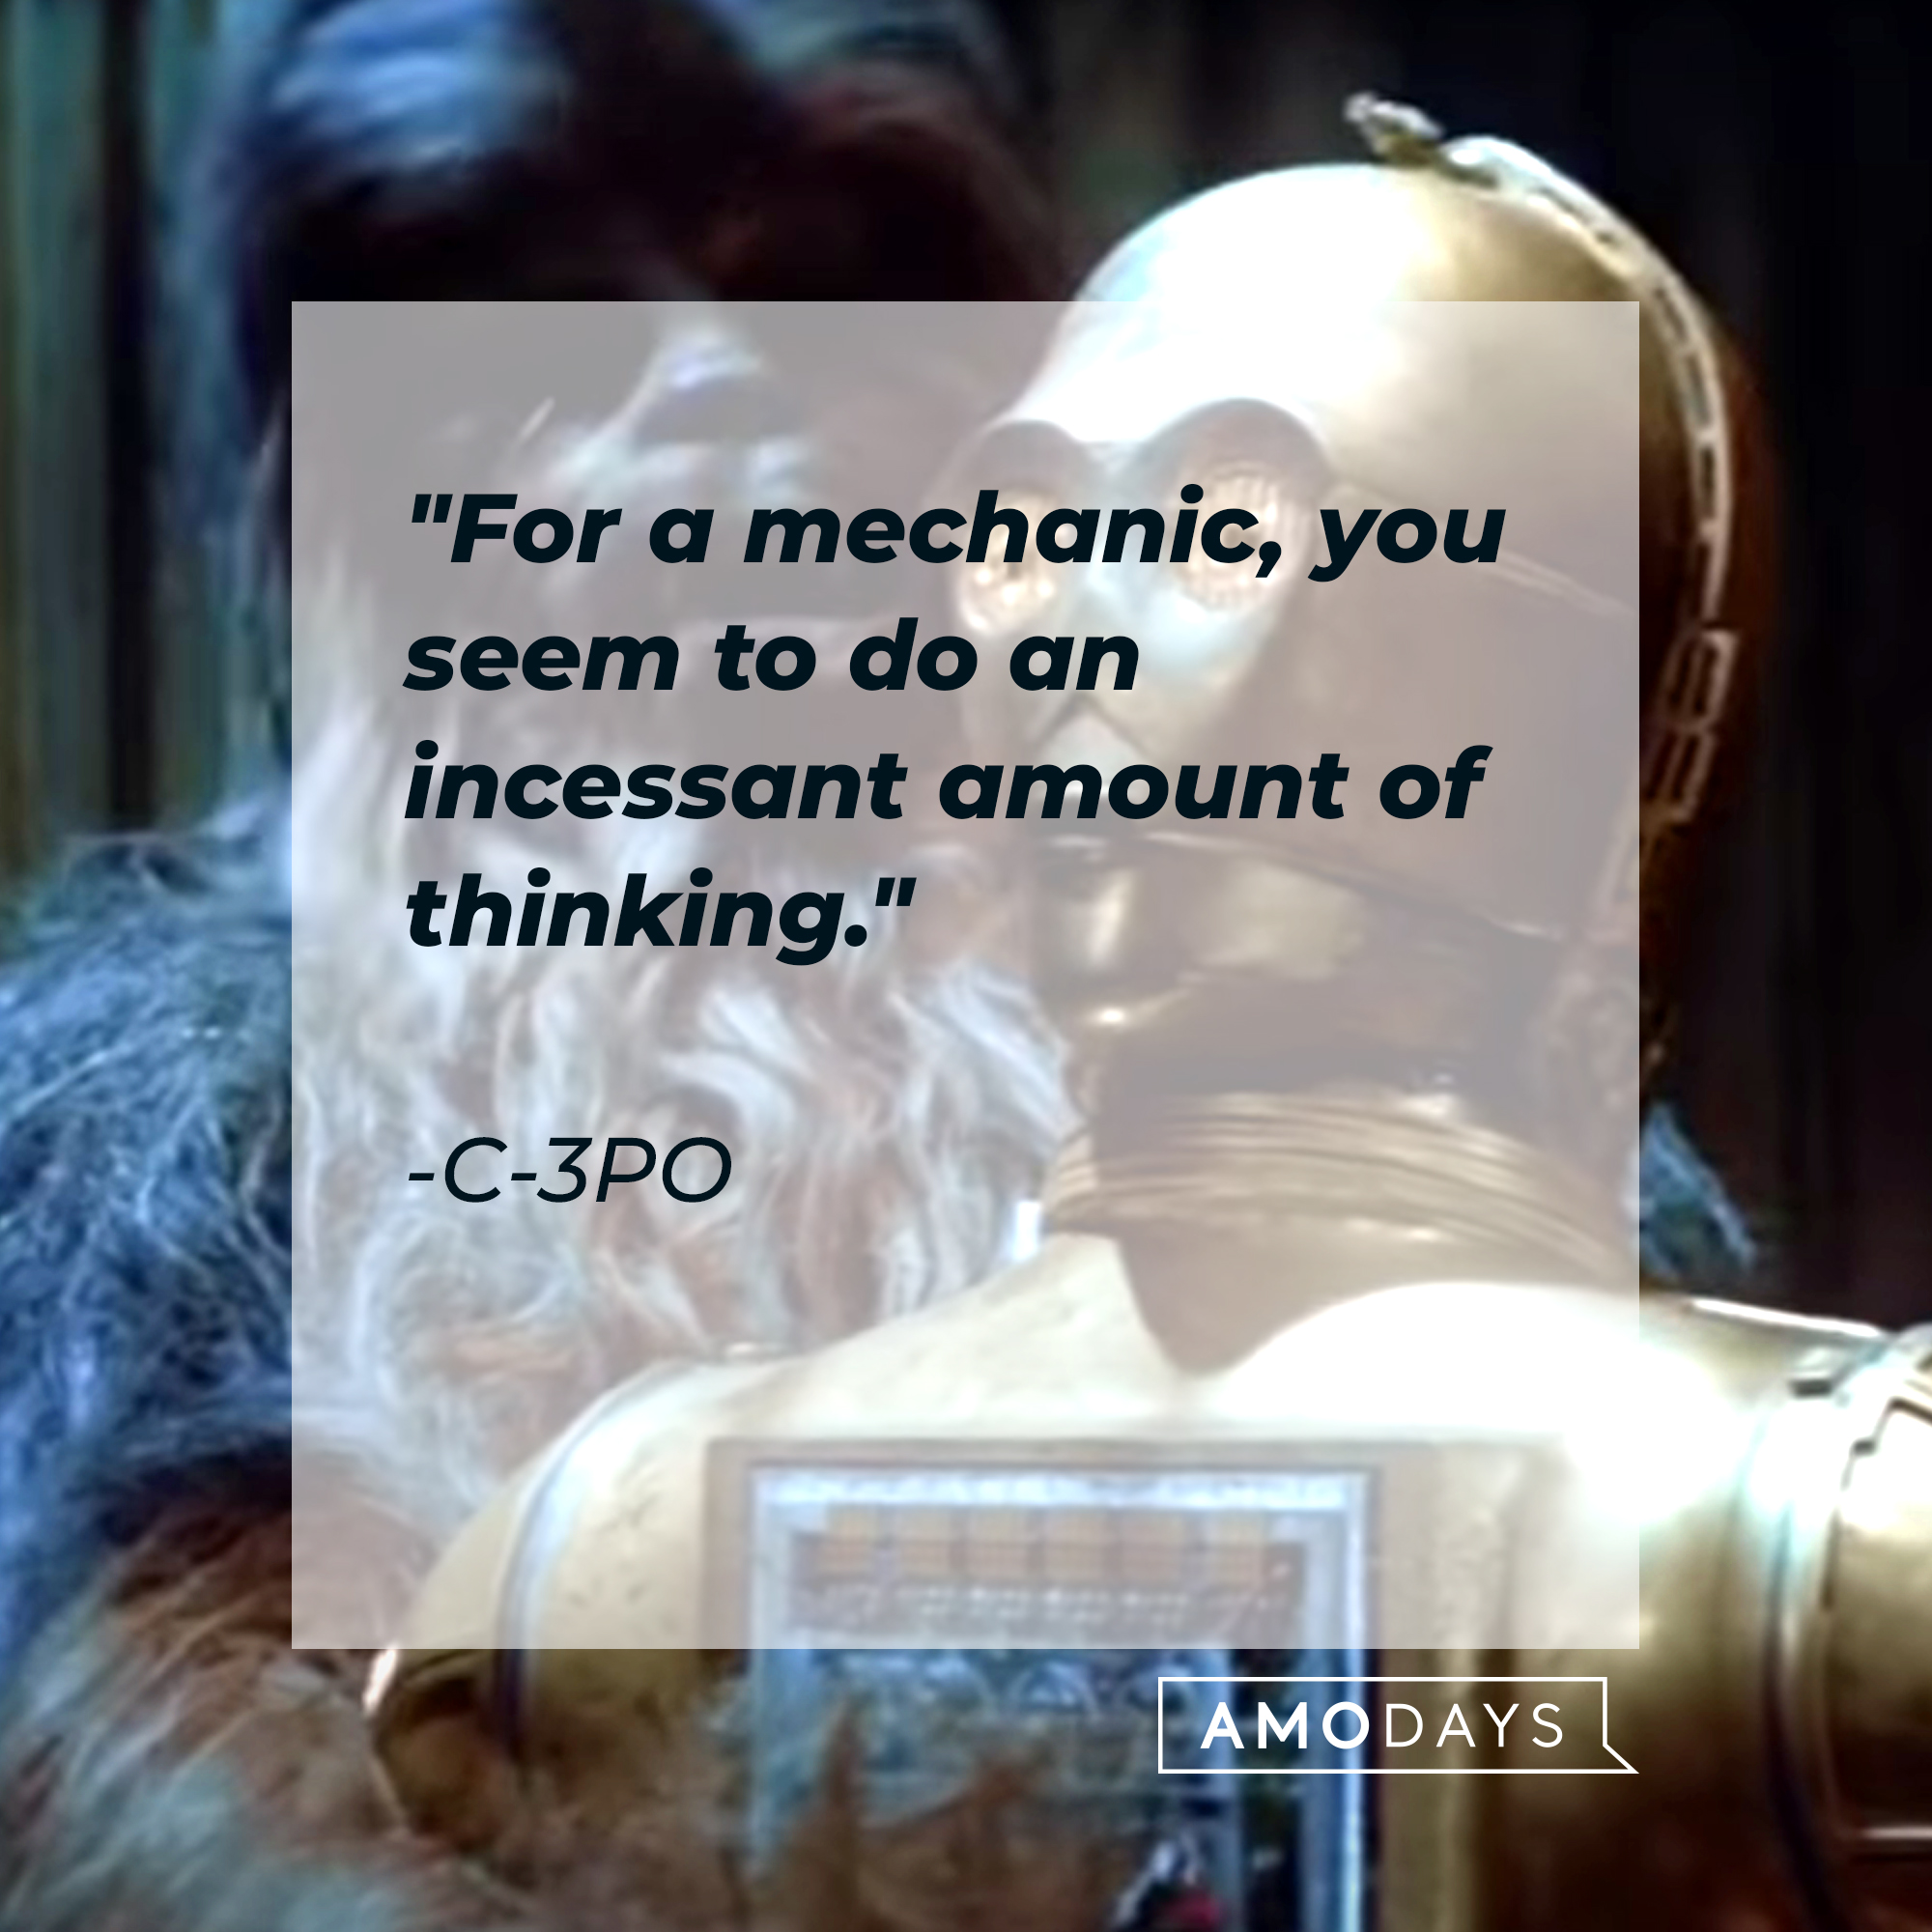 C-3PO's quote, "For a mechanic, you seem to do an incessant amount of thinking." | Source: Facebook/StarWars